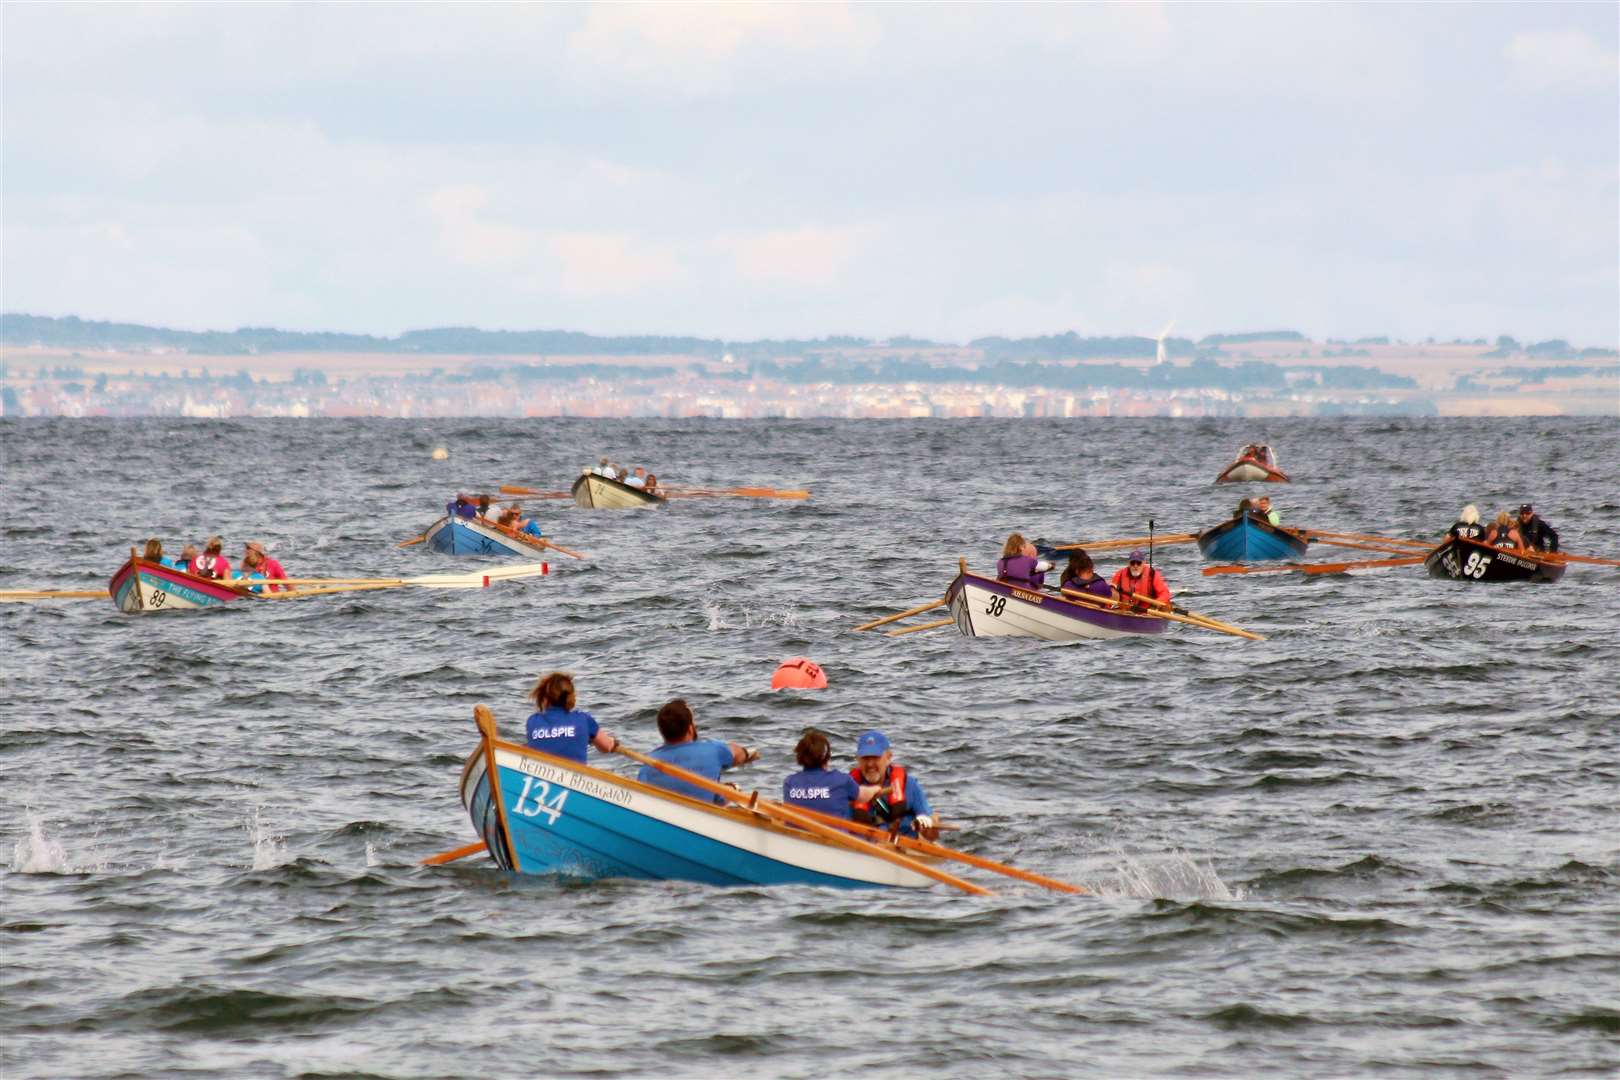 Traditionally, the course is from the harbour out round Criagleith and back, a distance of 3.4Km, but windy overnight conditions meant that the initial races all took place on a long triangular course inside the island. Picture: David Richardson